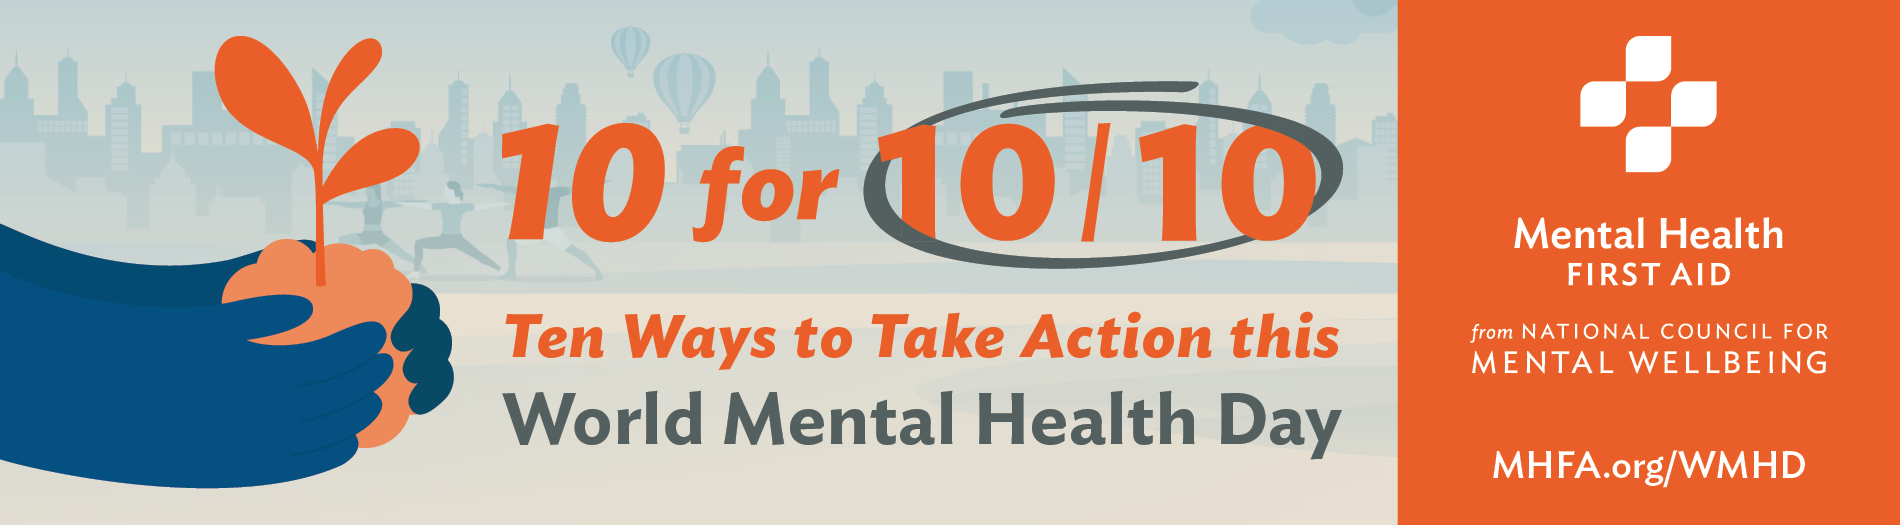 10 ways to take action this world mental health day